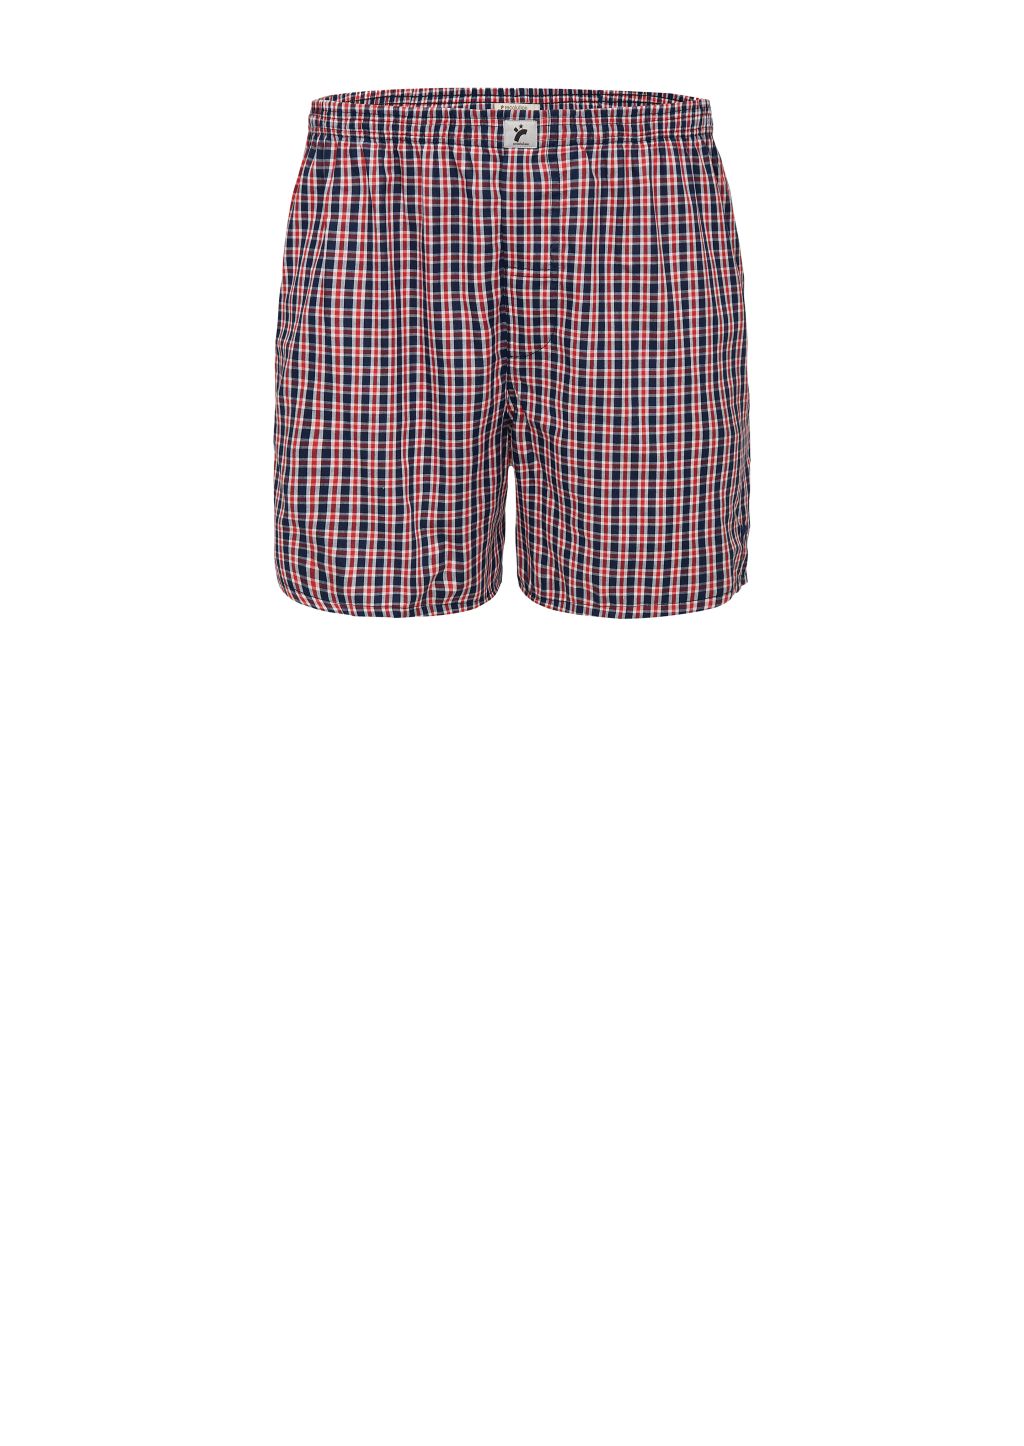 Männer Boxershorts #Checked Blue/White/Red Checked